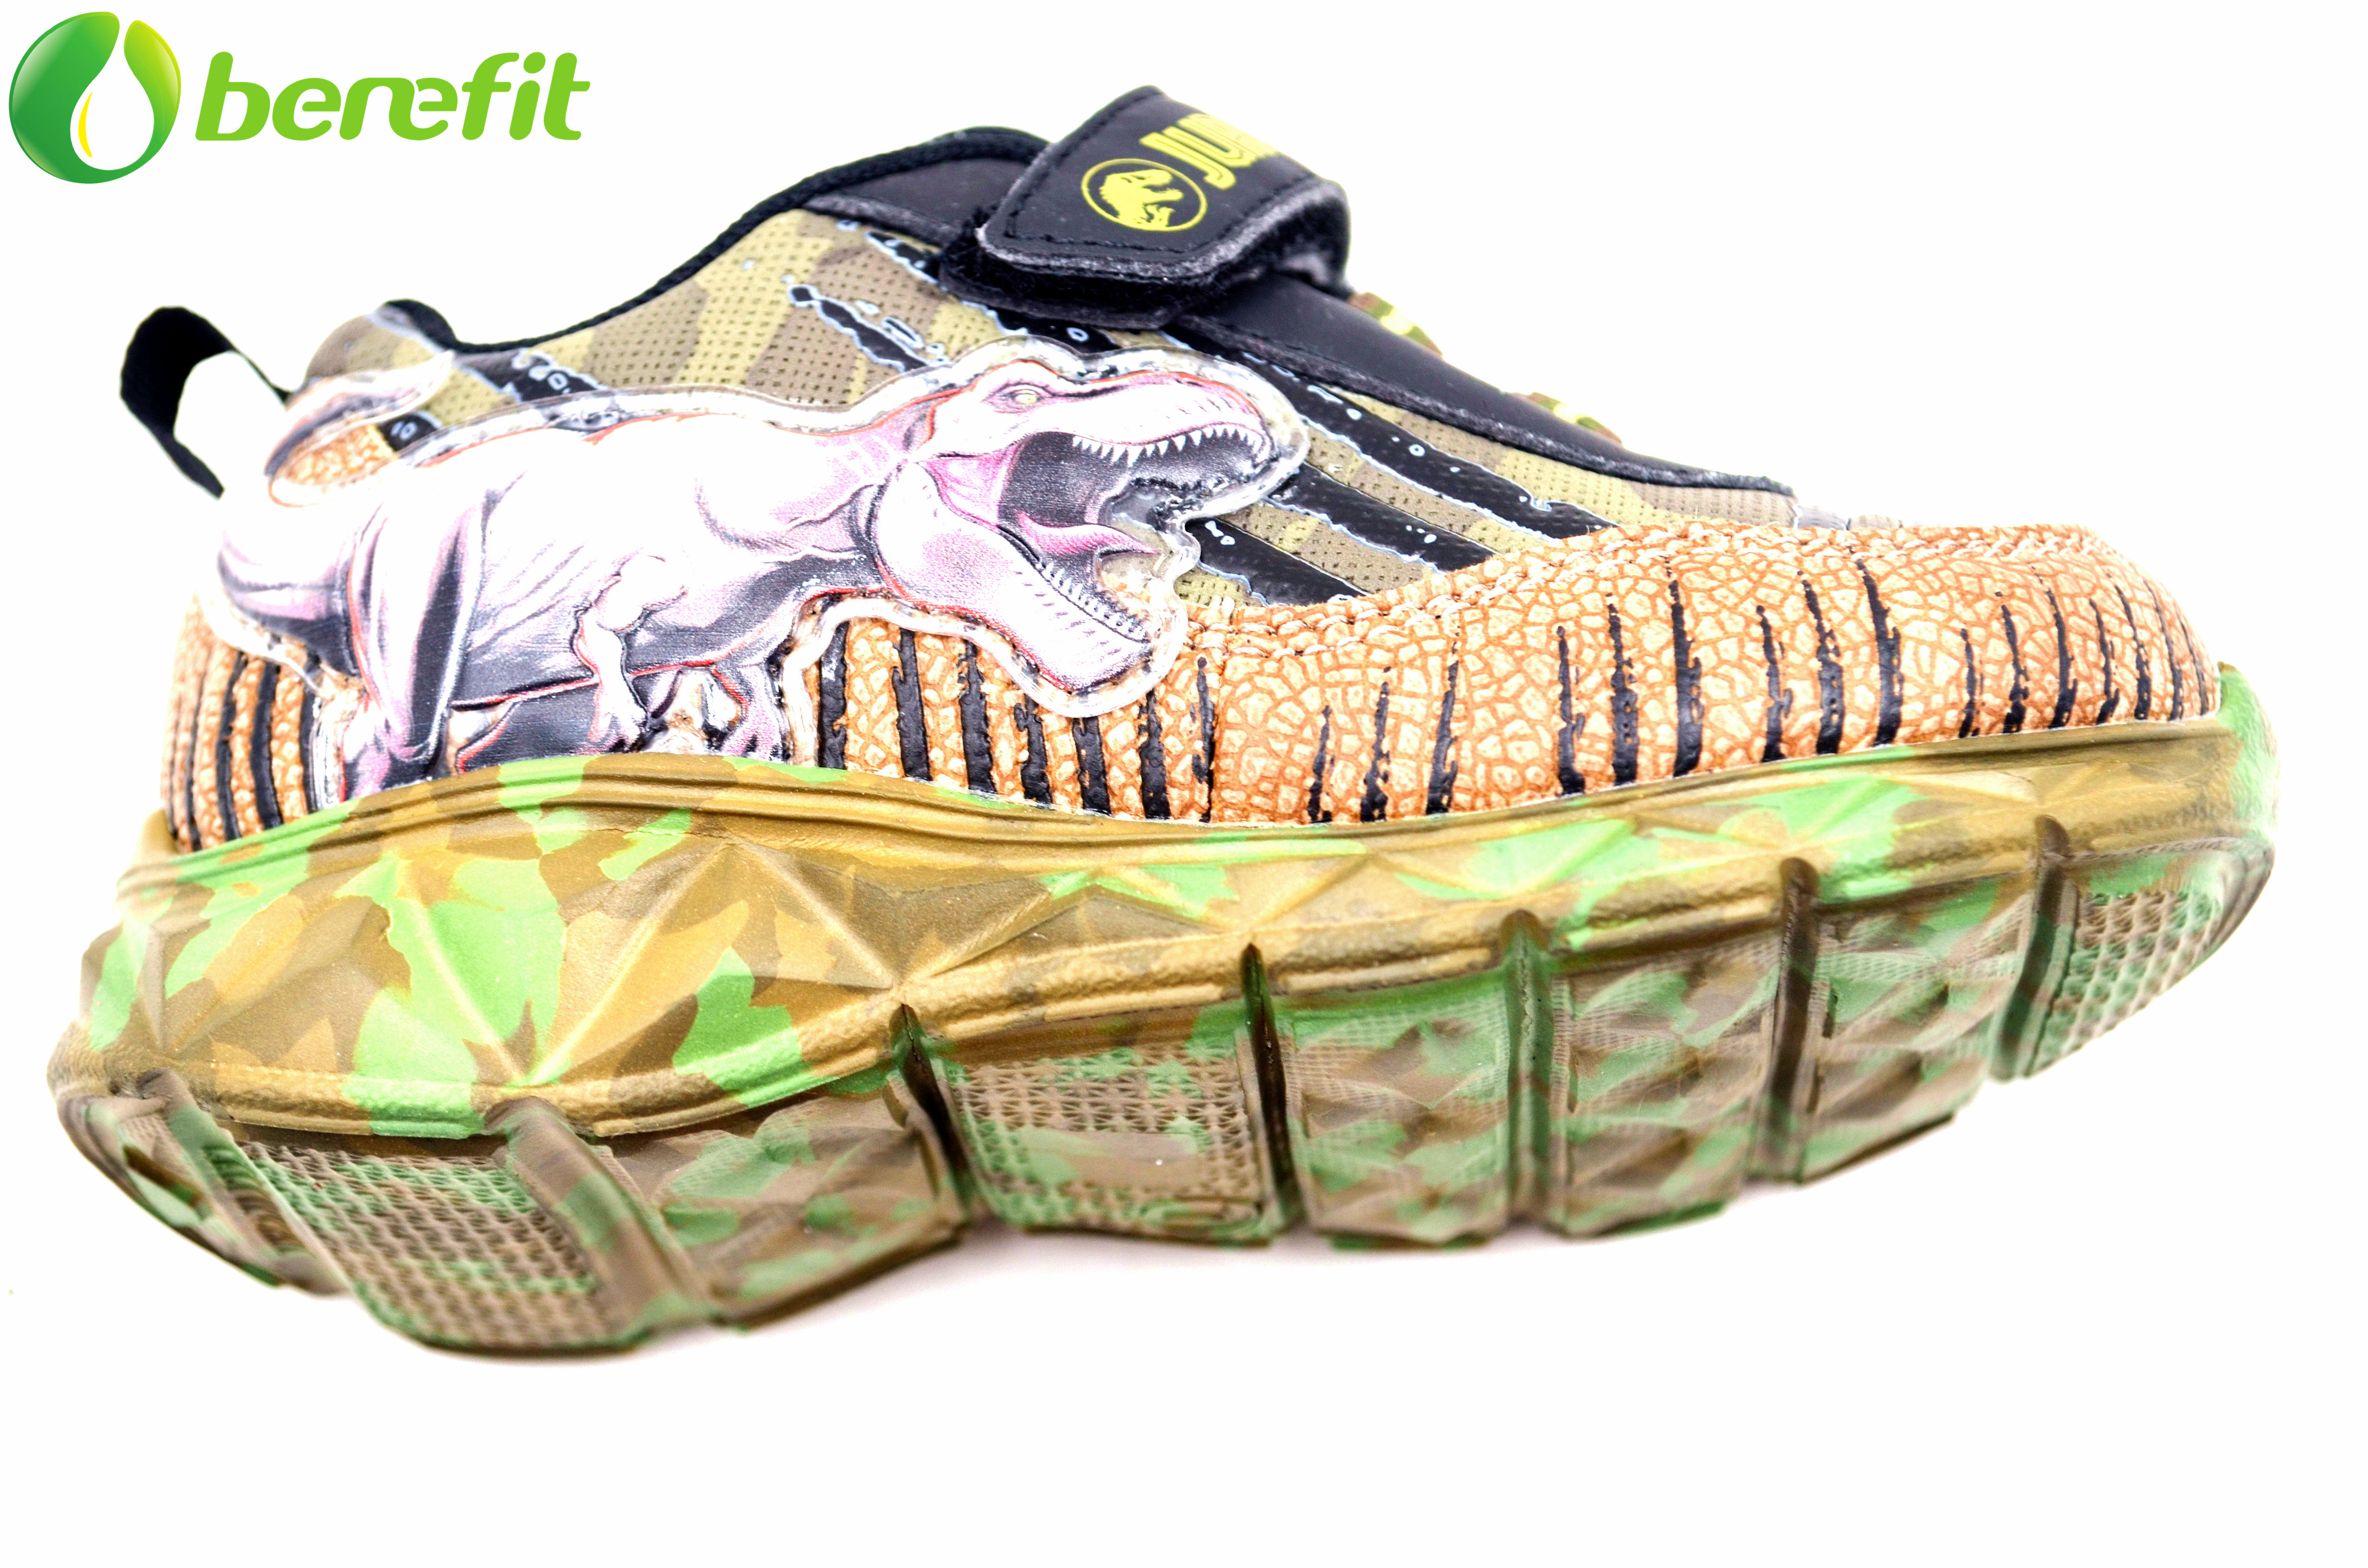 Favorite Characters Jurassic World Lighted Kids Athletic Sneakers 